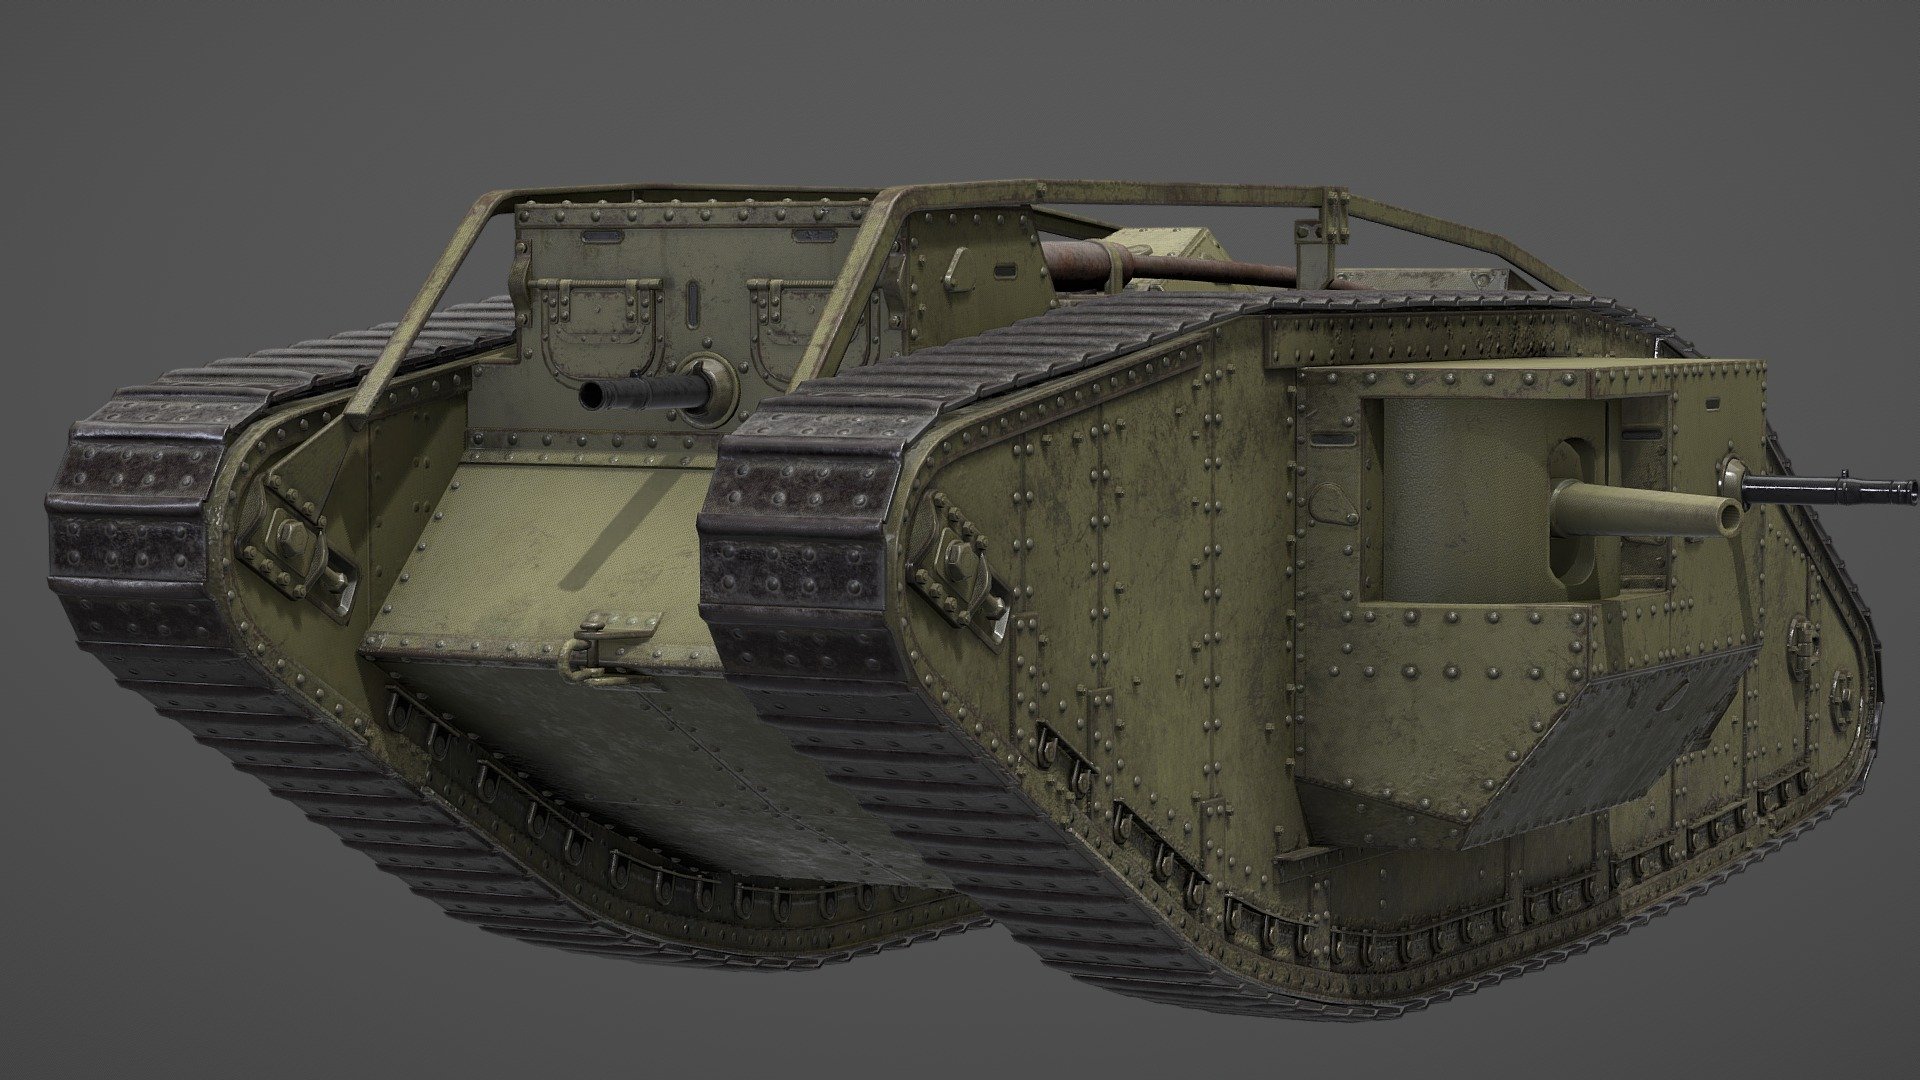 Mark IV was a British heavy tank of the First World War. It was first used in mid 1917 at the Battle of Messines Ridge. It remained in official British service until the end of the War, and a small number served briefly with other combatants afterwards.
(Wikipedia) - Mark IV Male Heavy Tank - 3D model by Spycer42 3d model